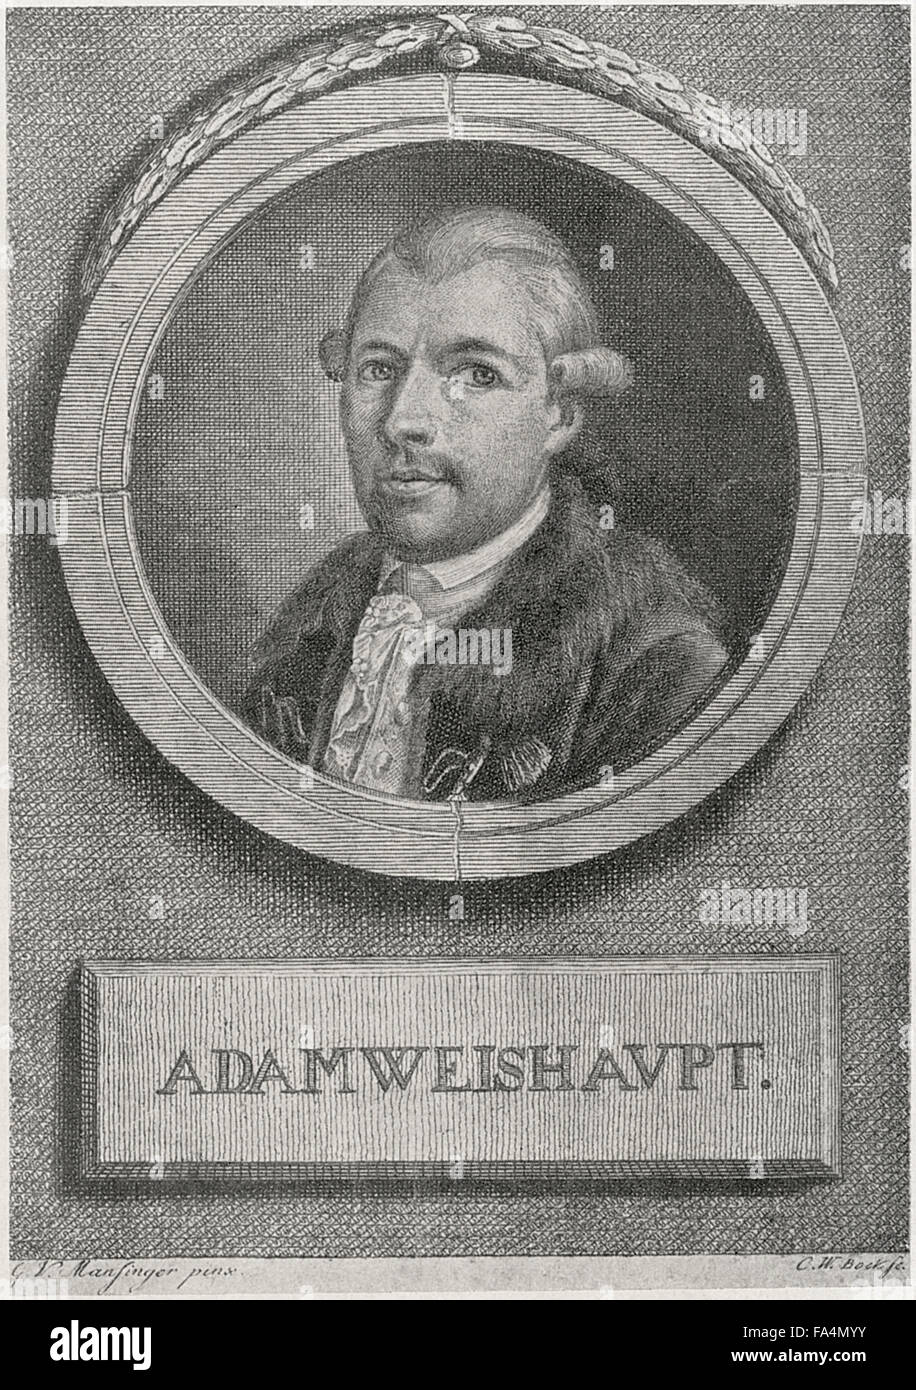 Johann Adam Weishaupt (1748-1830), German, philosopher, Founder of the Order of the Illuminati Secret Society, after Mansinger painting, Engraved by C,W, Bockfe, Book Illustration from “Cagliostro, The Splendour and Misery of A Master of Magic”, Chapman and Hall LTD, W.R.H. Trowbridge, 1910 Stock Photo